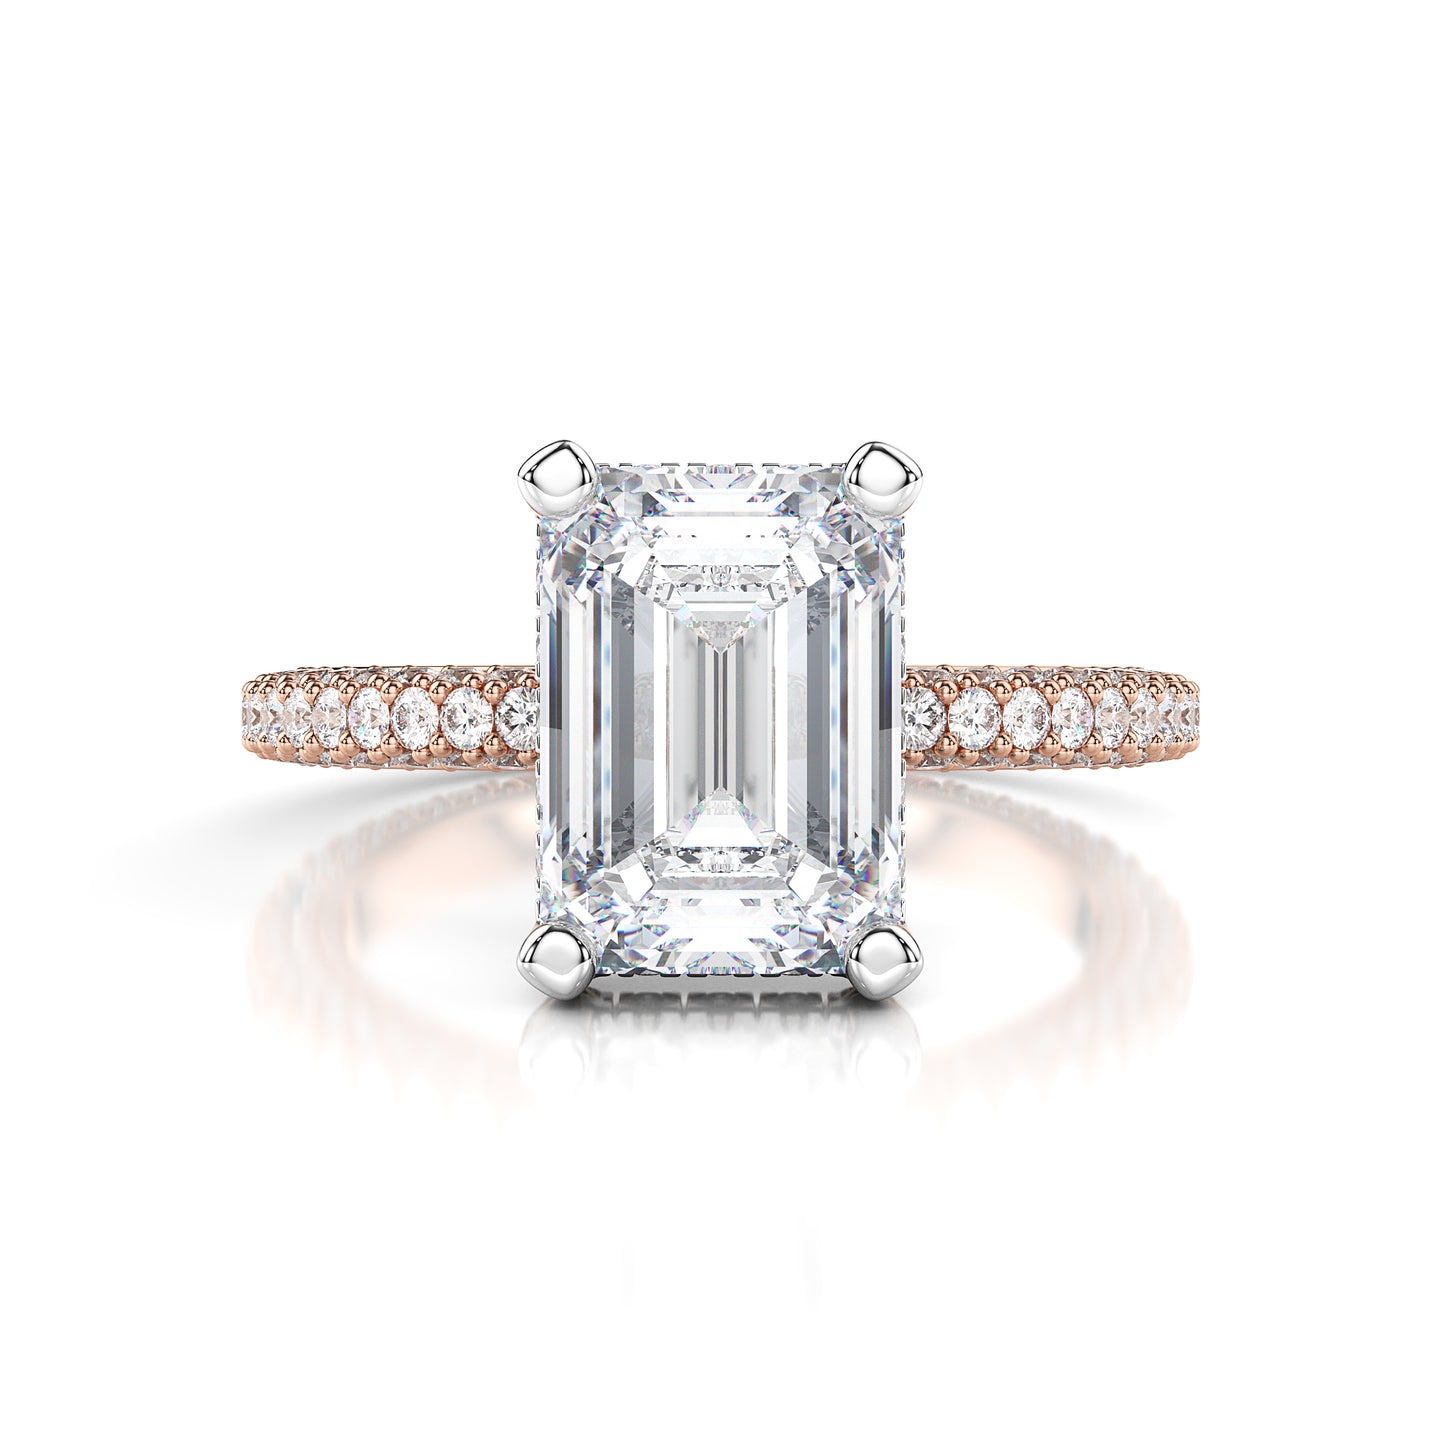 Emerald Cut Engagement Ring with 3 Row Pavé Band